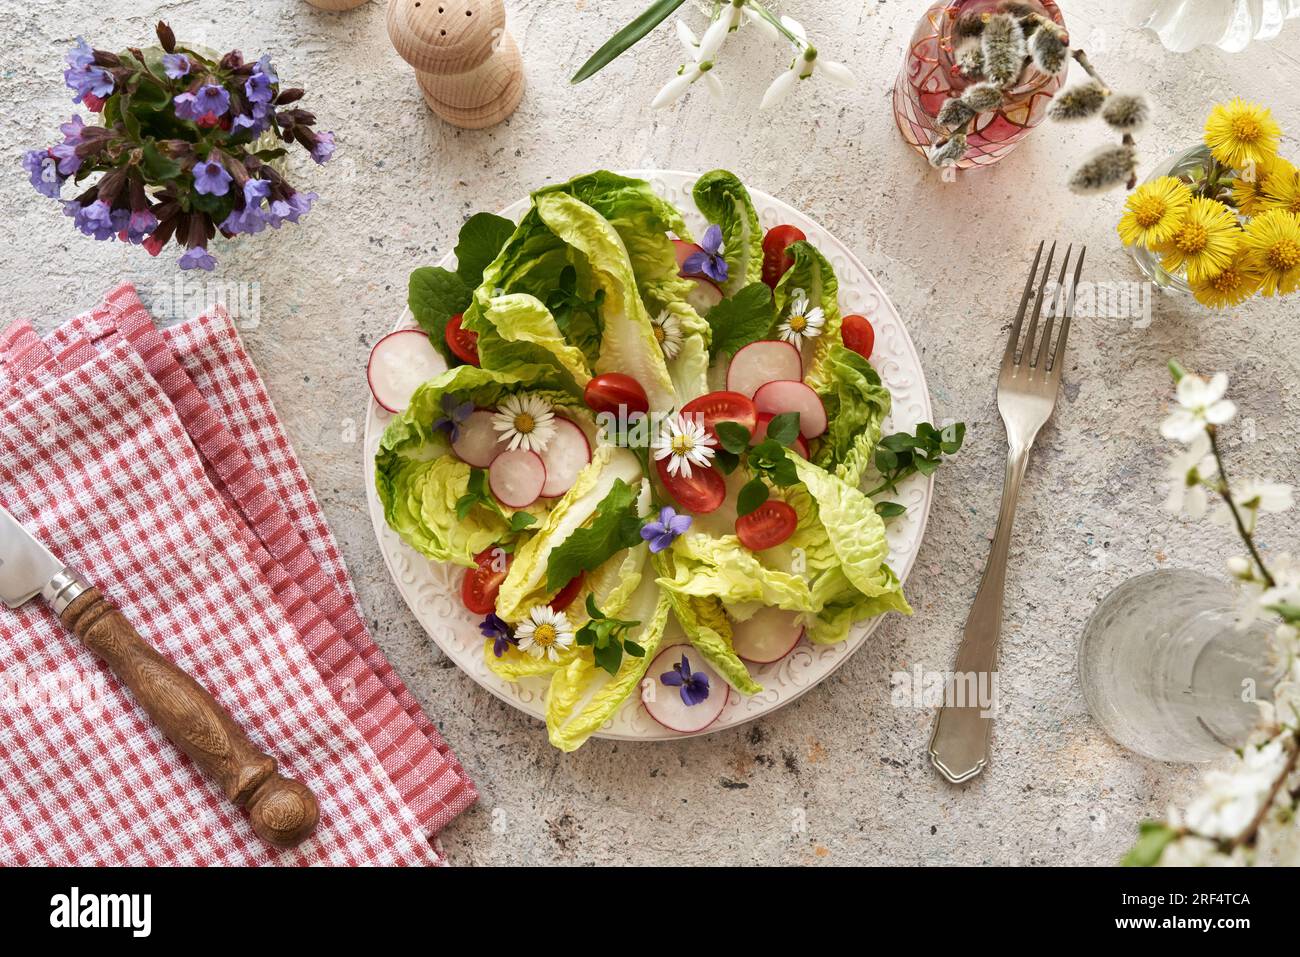 Fresh vegetable salad with common daisy flowers, chickweed and other wild edible plants harvested in spring Stock Photo